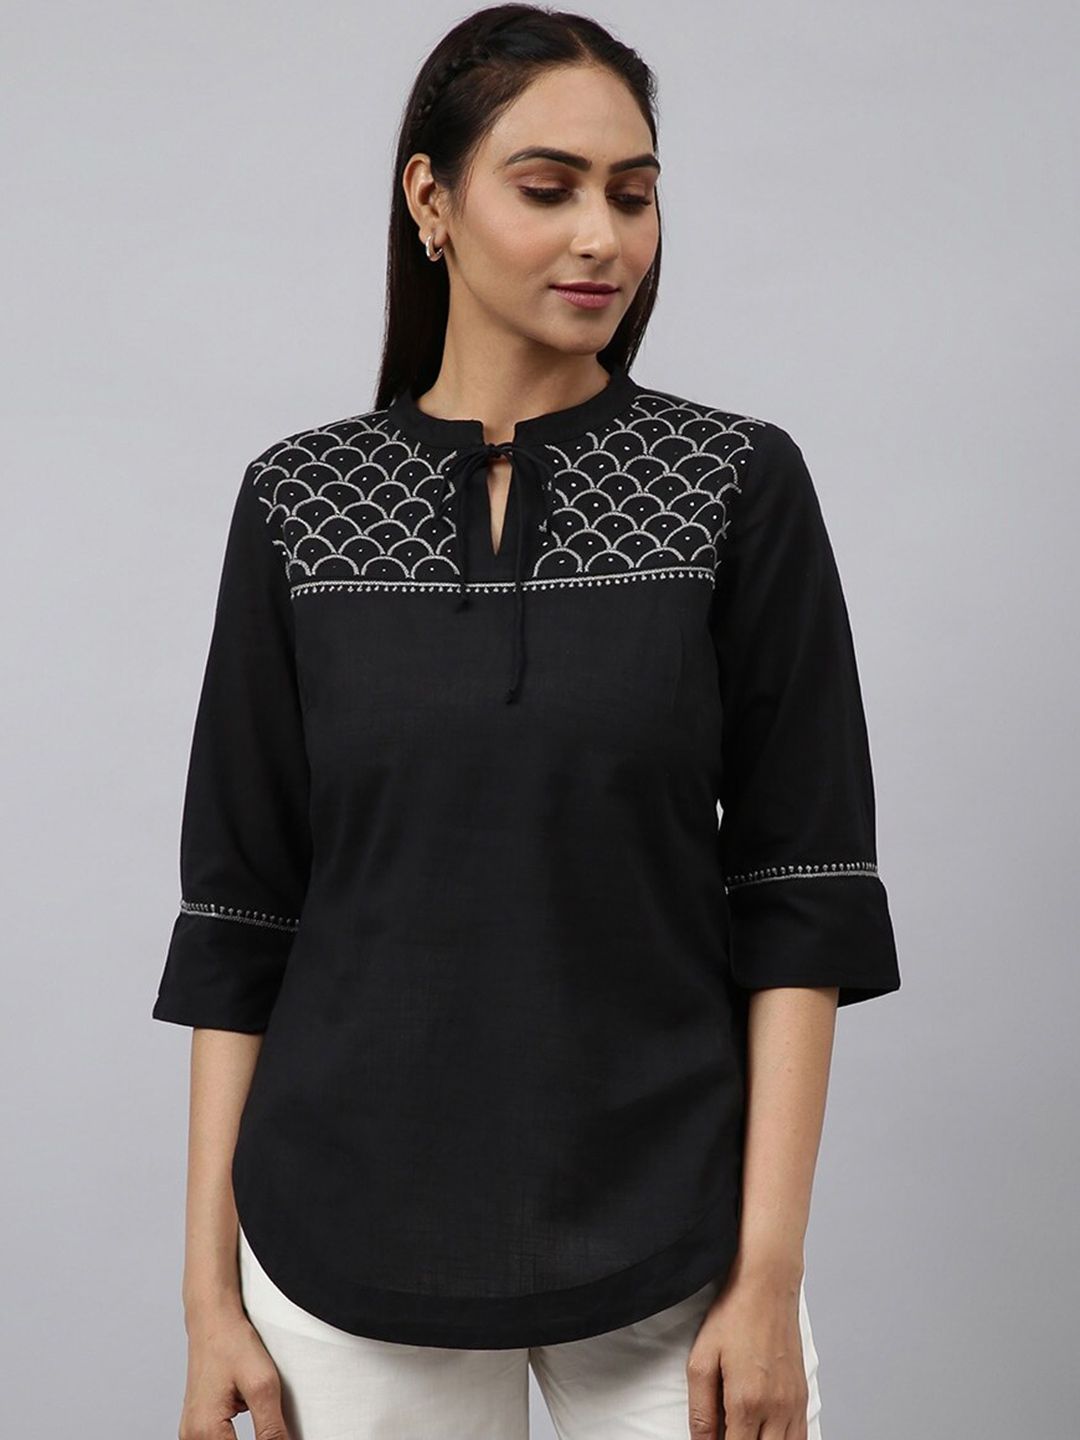 Fabindia Embroidered Tie-Up Neck Top Price in India